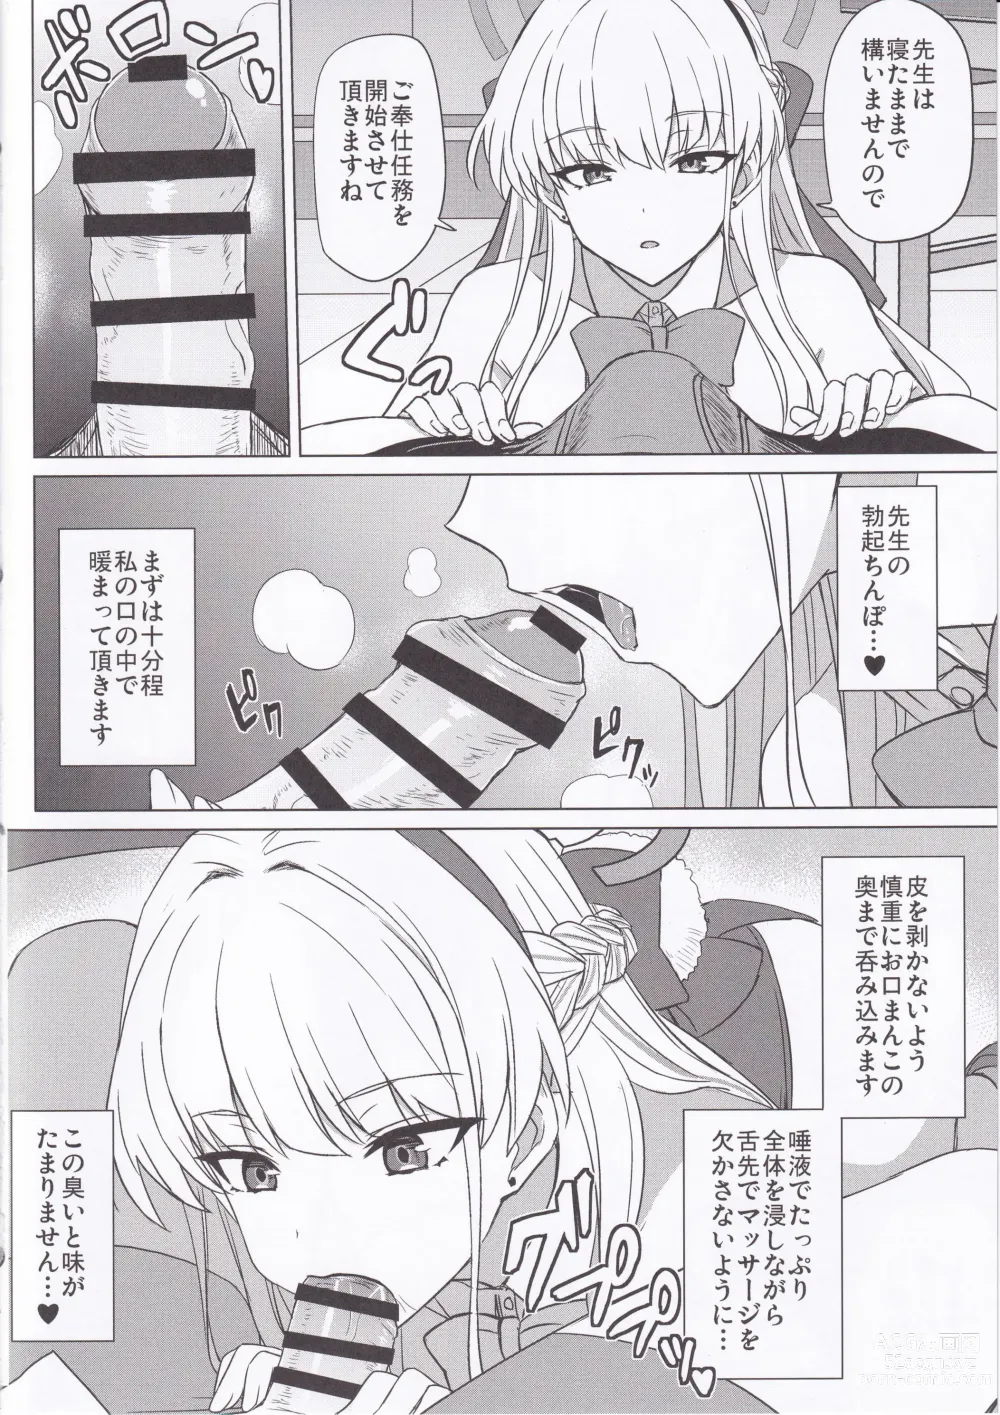 Page 3 of doujinshi Bunny Archive